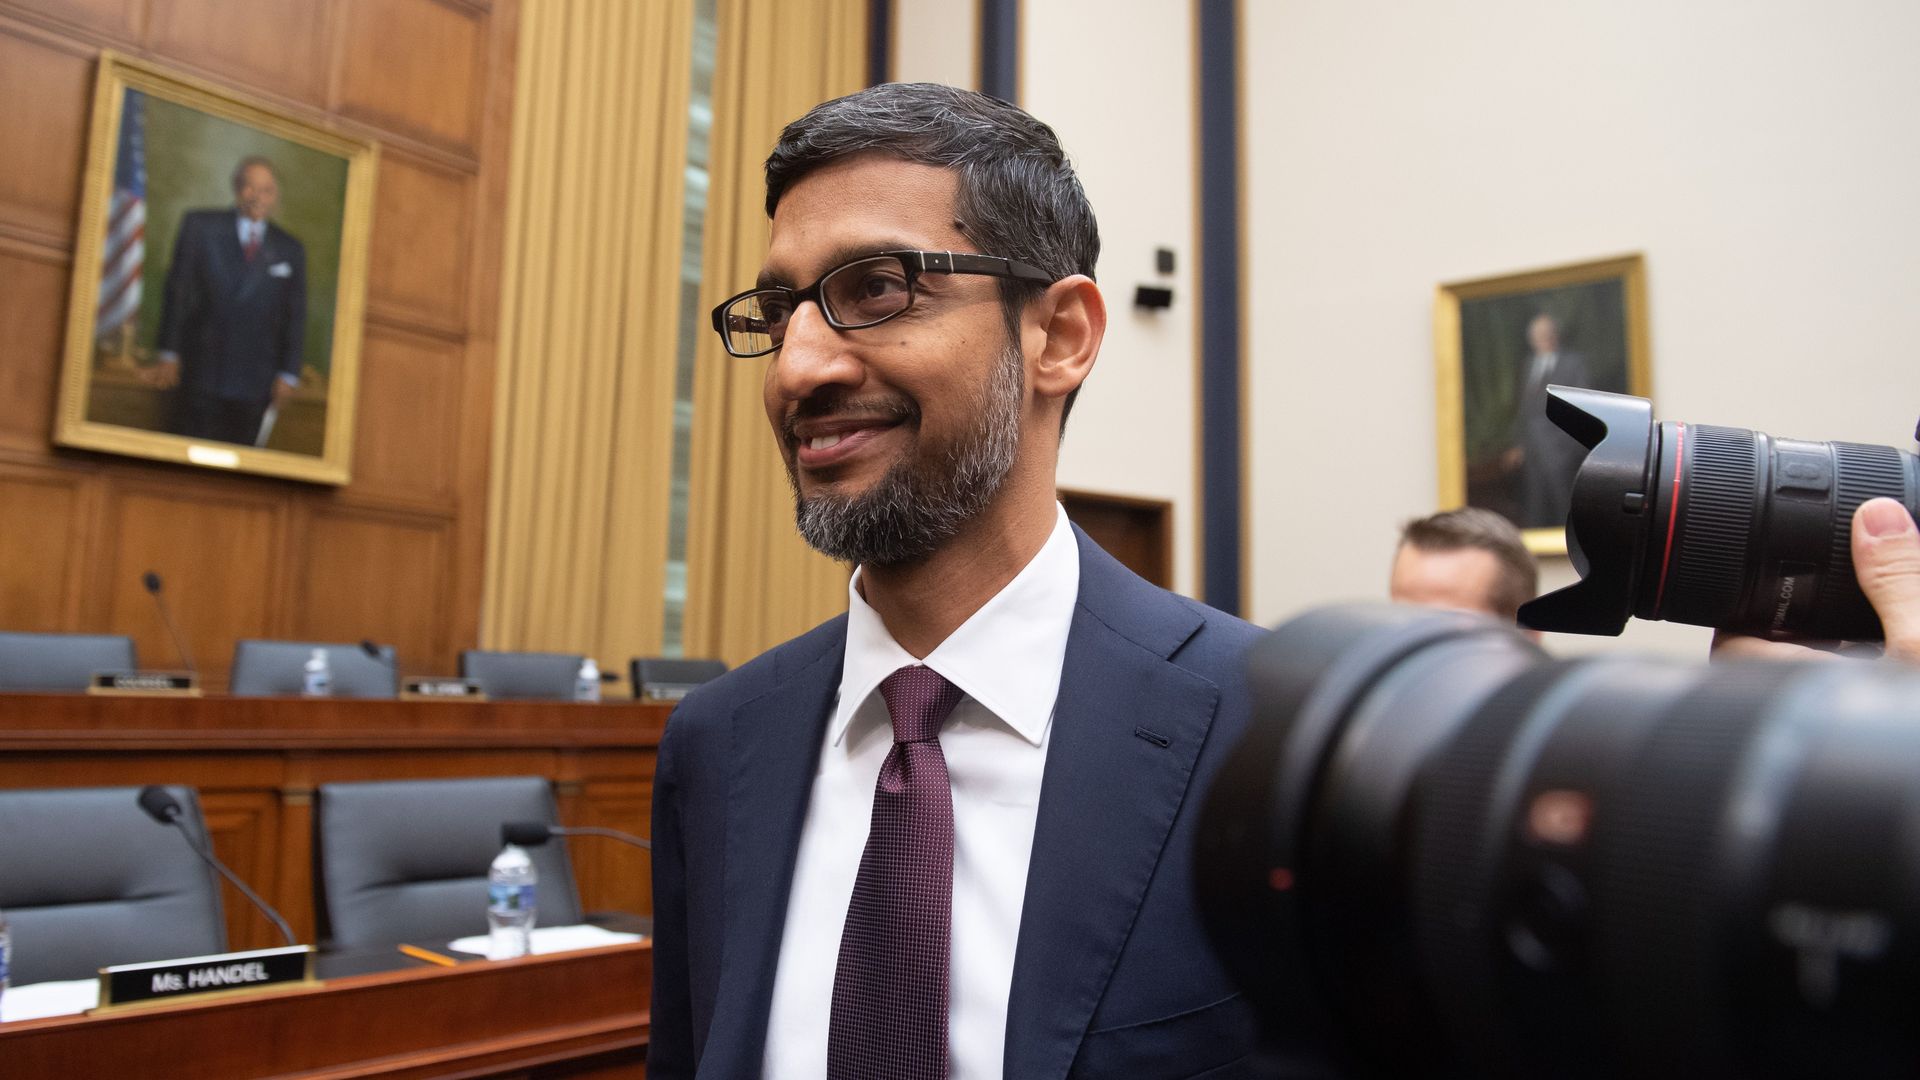 Google CEO refutes conservative claims of search bias - Axios1920 x 1080